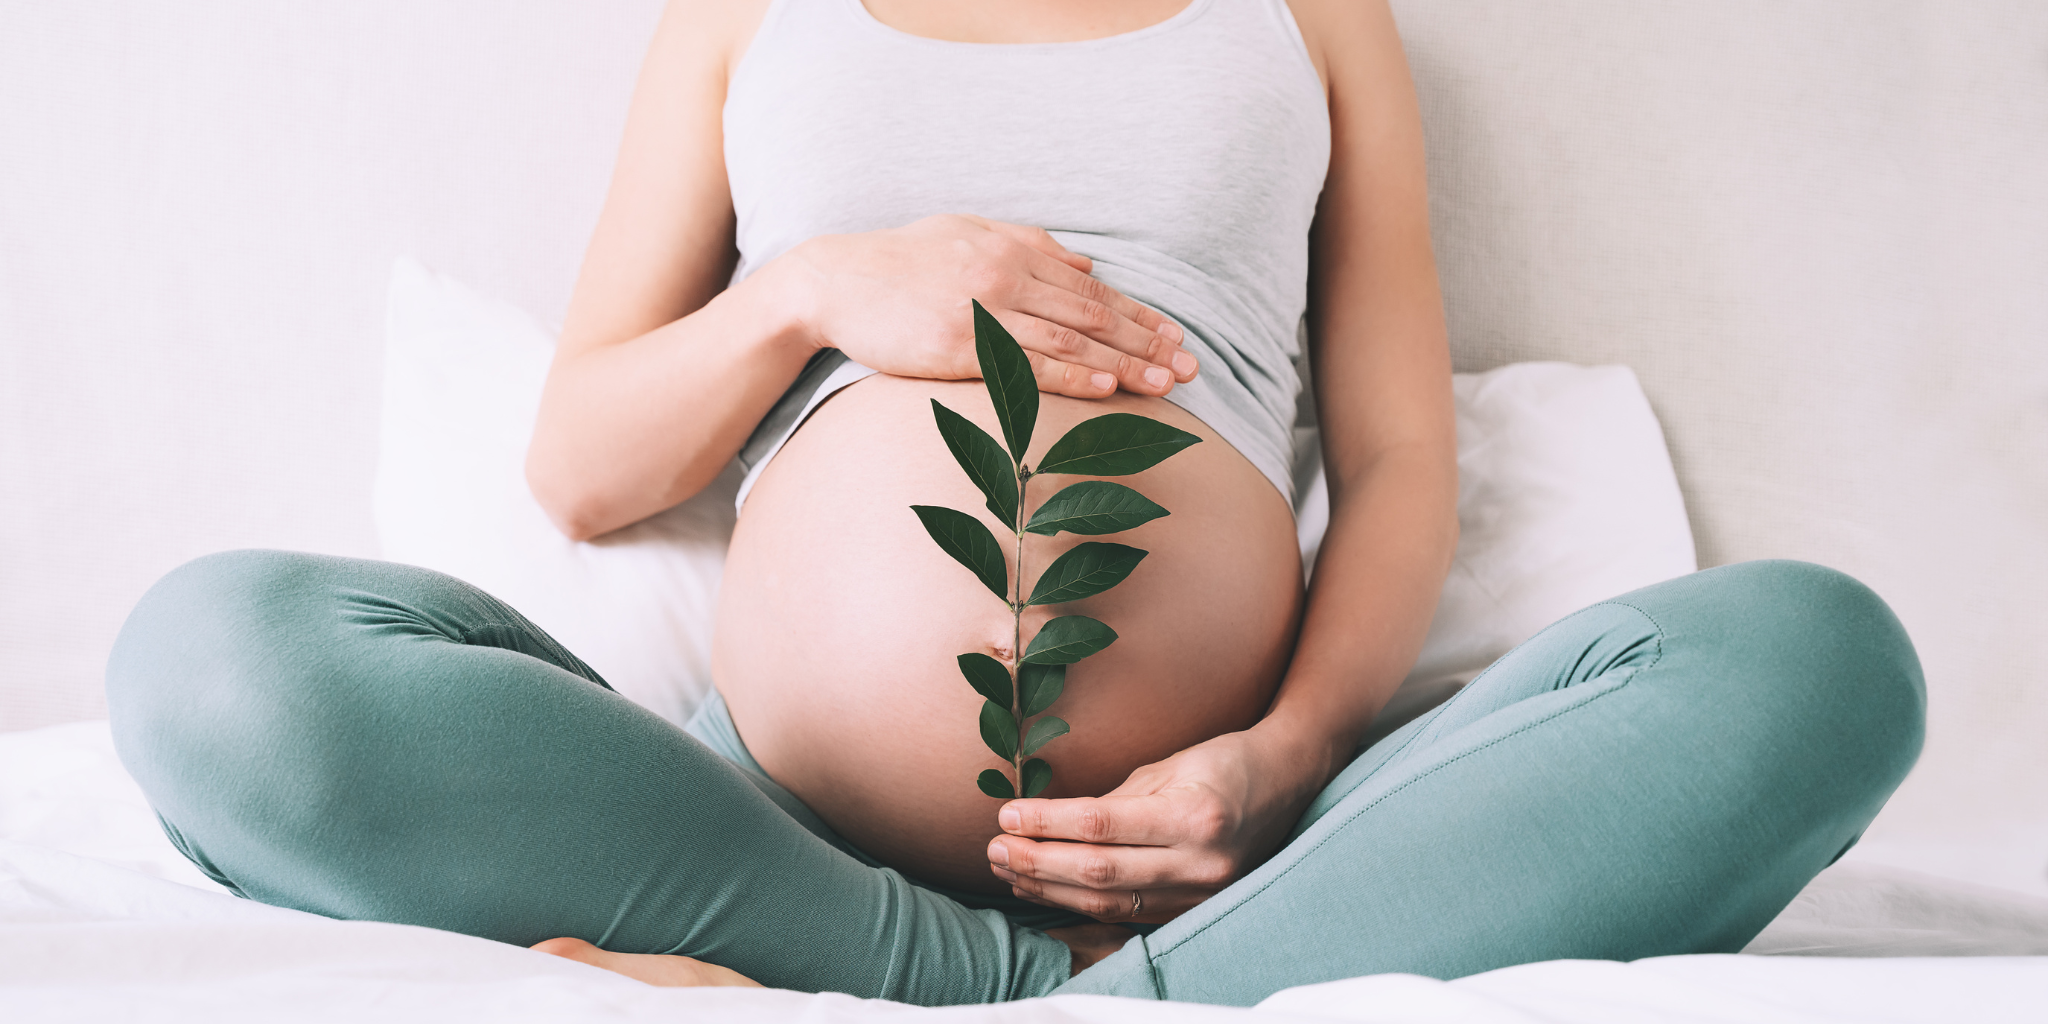 What is the difference between morning sickness and hyperemesis gravidarum?